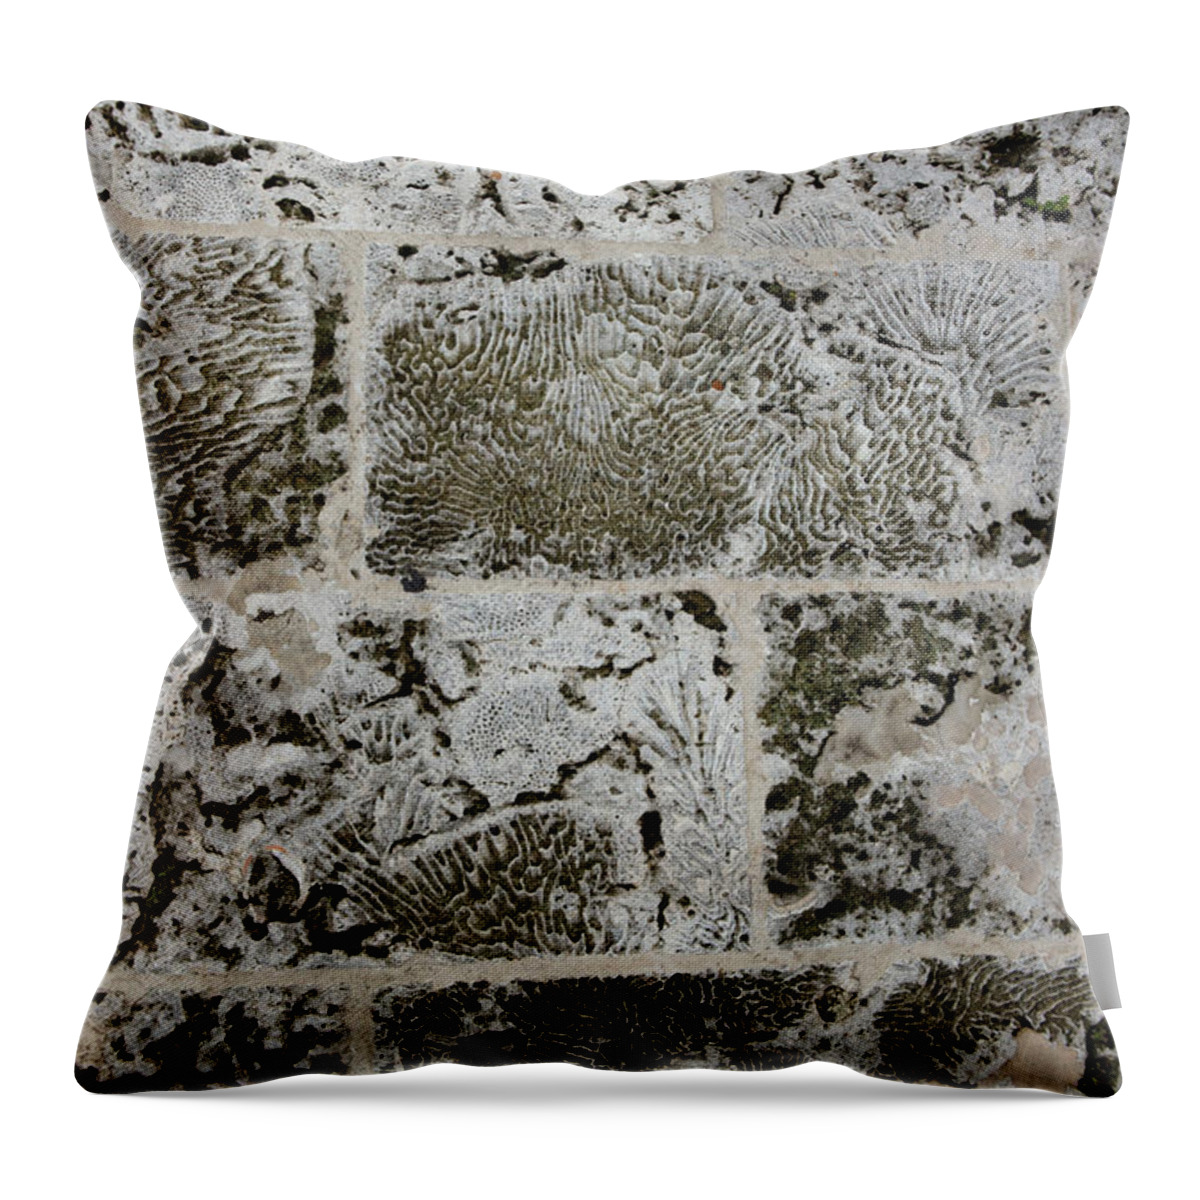 Texture Throw Pillow featuring the photograph Coral Wall 205 by Michael Fryd